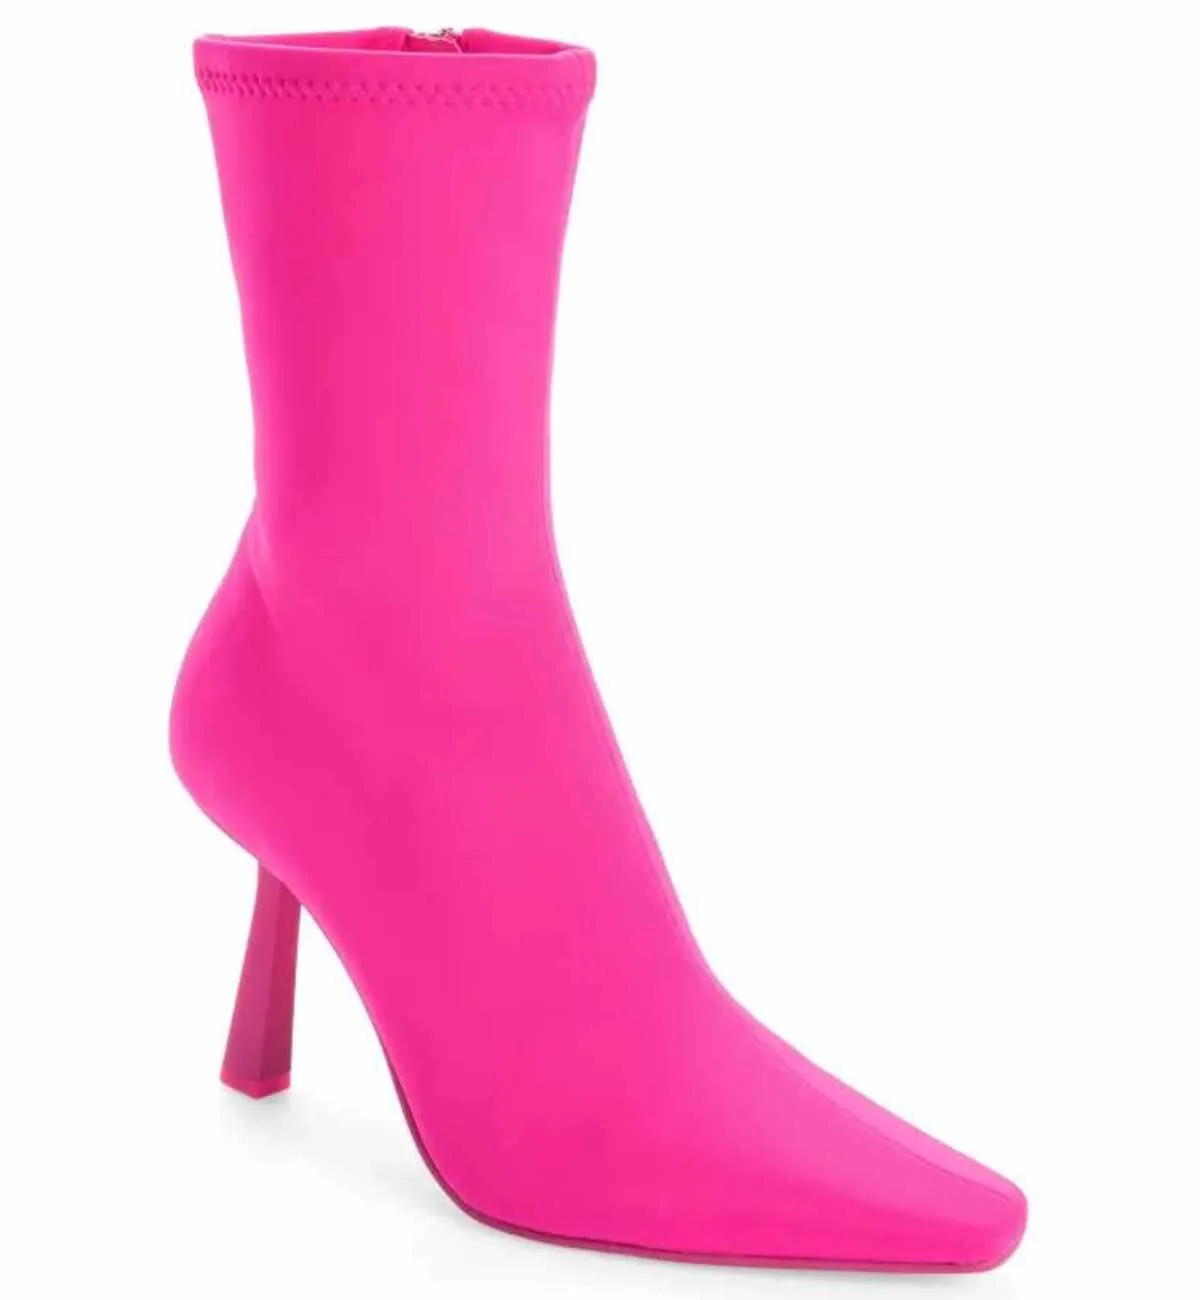 Hot Pink Barbie Core Fashion sock Booties on white background.